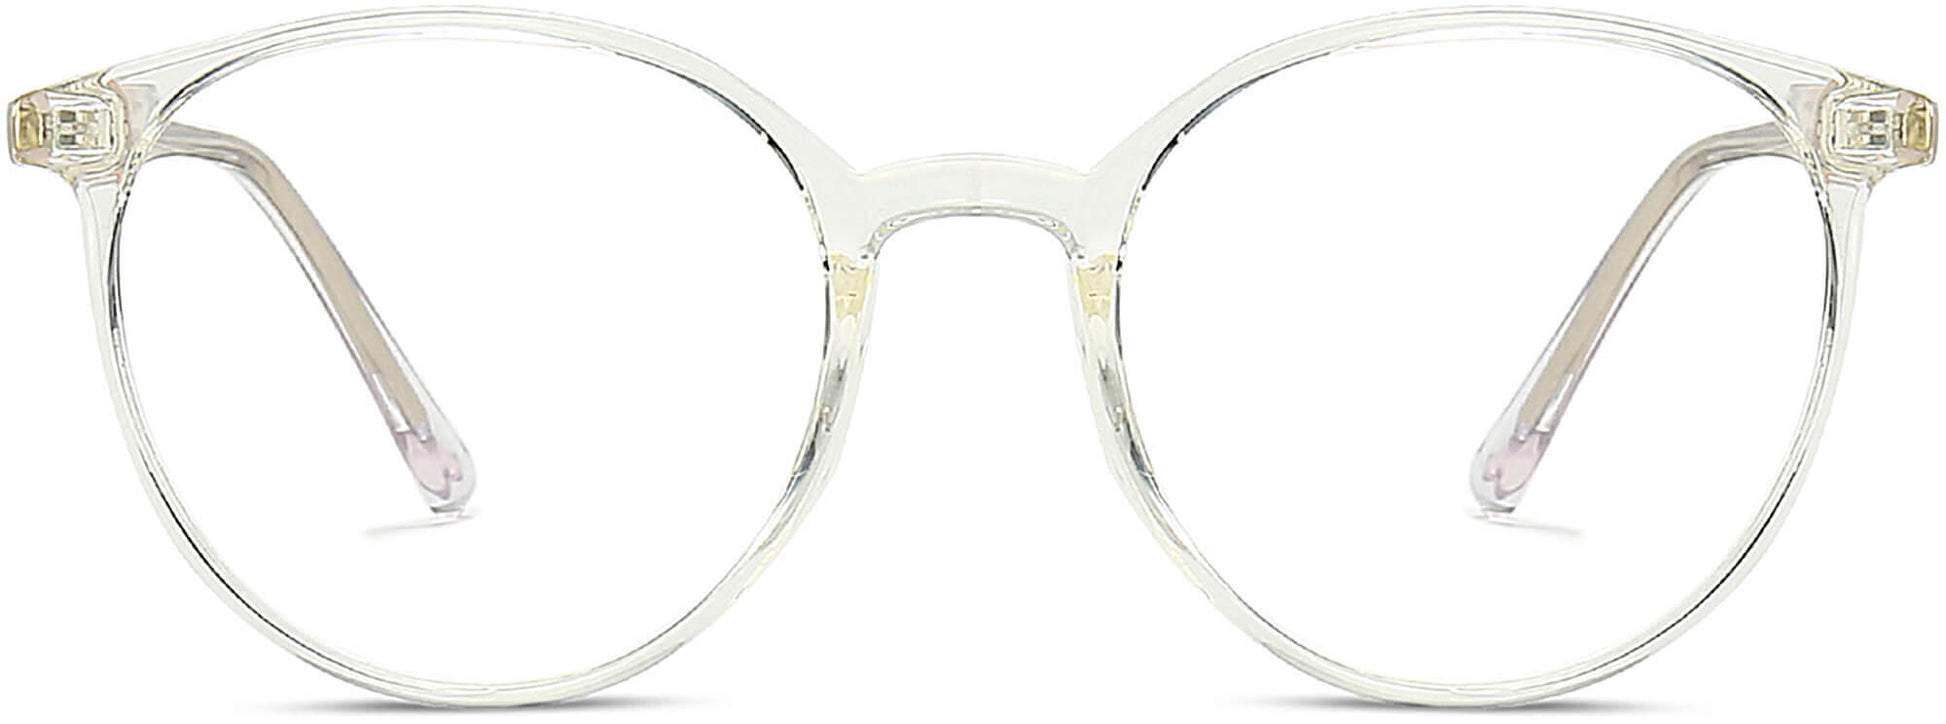 Elaine Round Clear Eyeglasses from ANRRI, front view